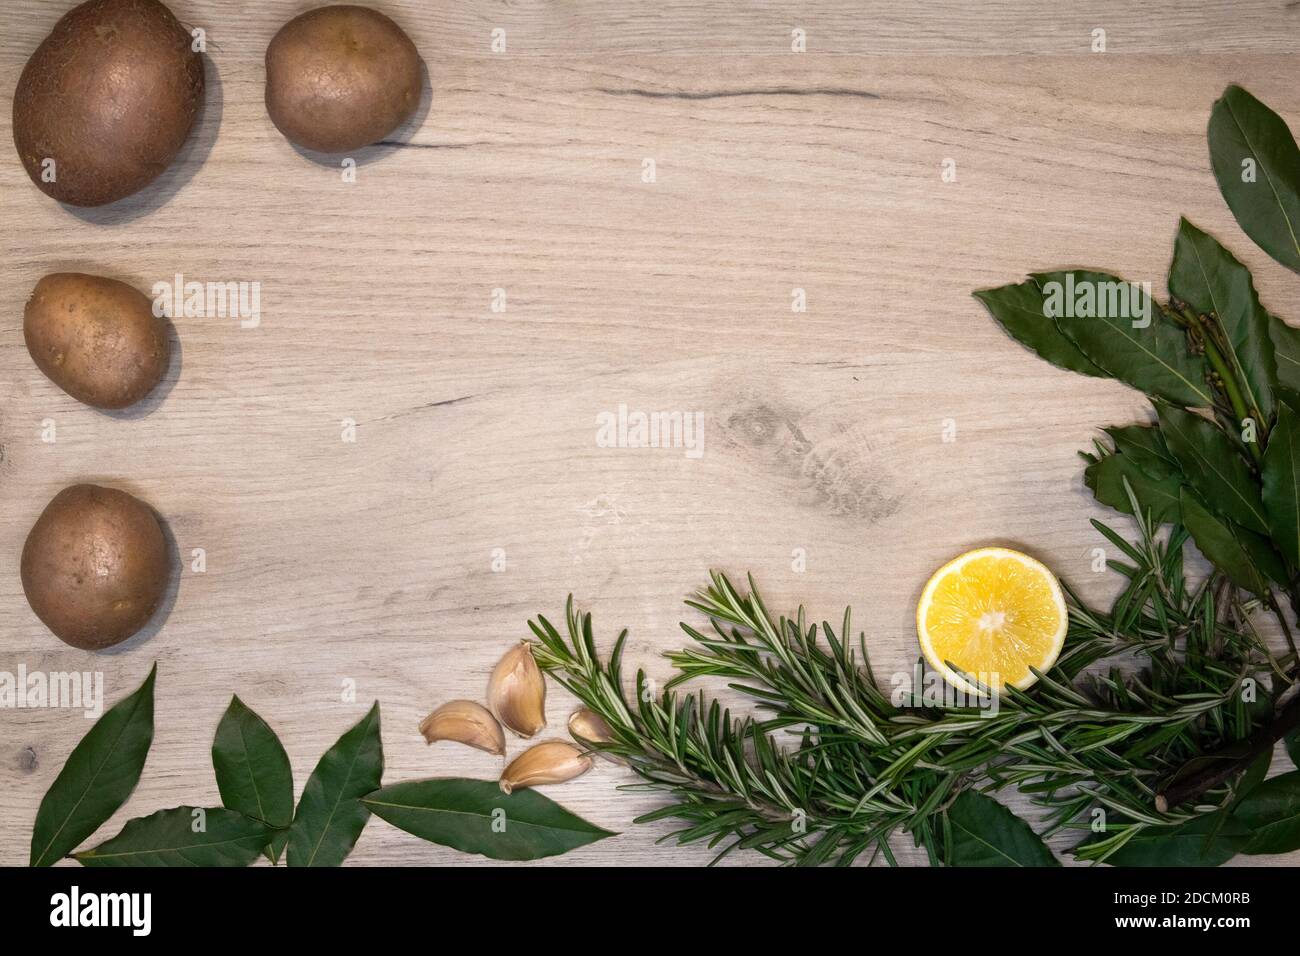 Light wooden board framed with fresh rosemary sprigs, bay leaves, lemon half, cloves of garlic and few raw potatoes, design template Stock Photo